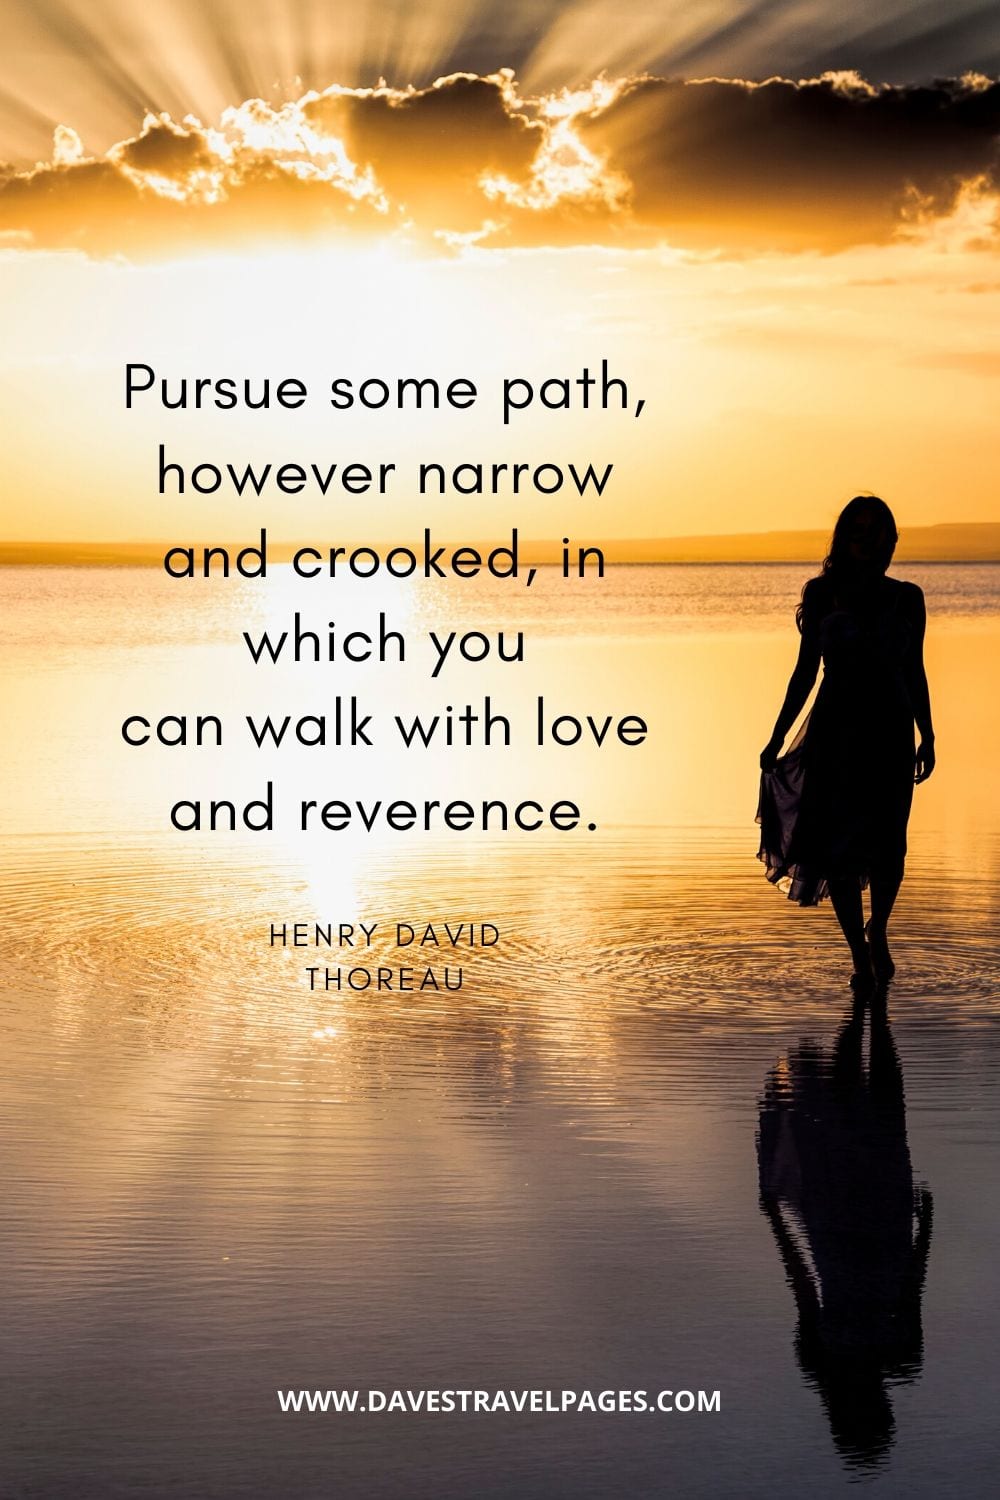 Pursue some path, however narrow and crooked, in which you can walk with love and reverence. - Henry david thoreau